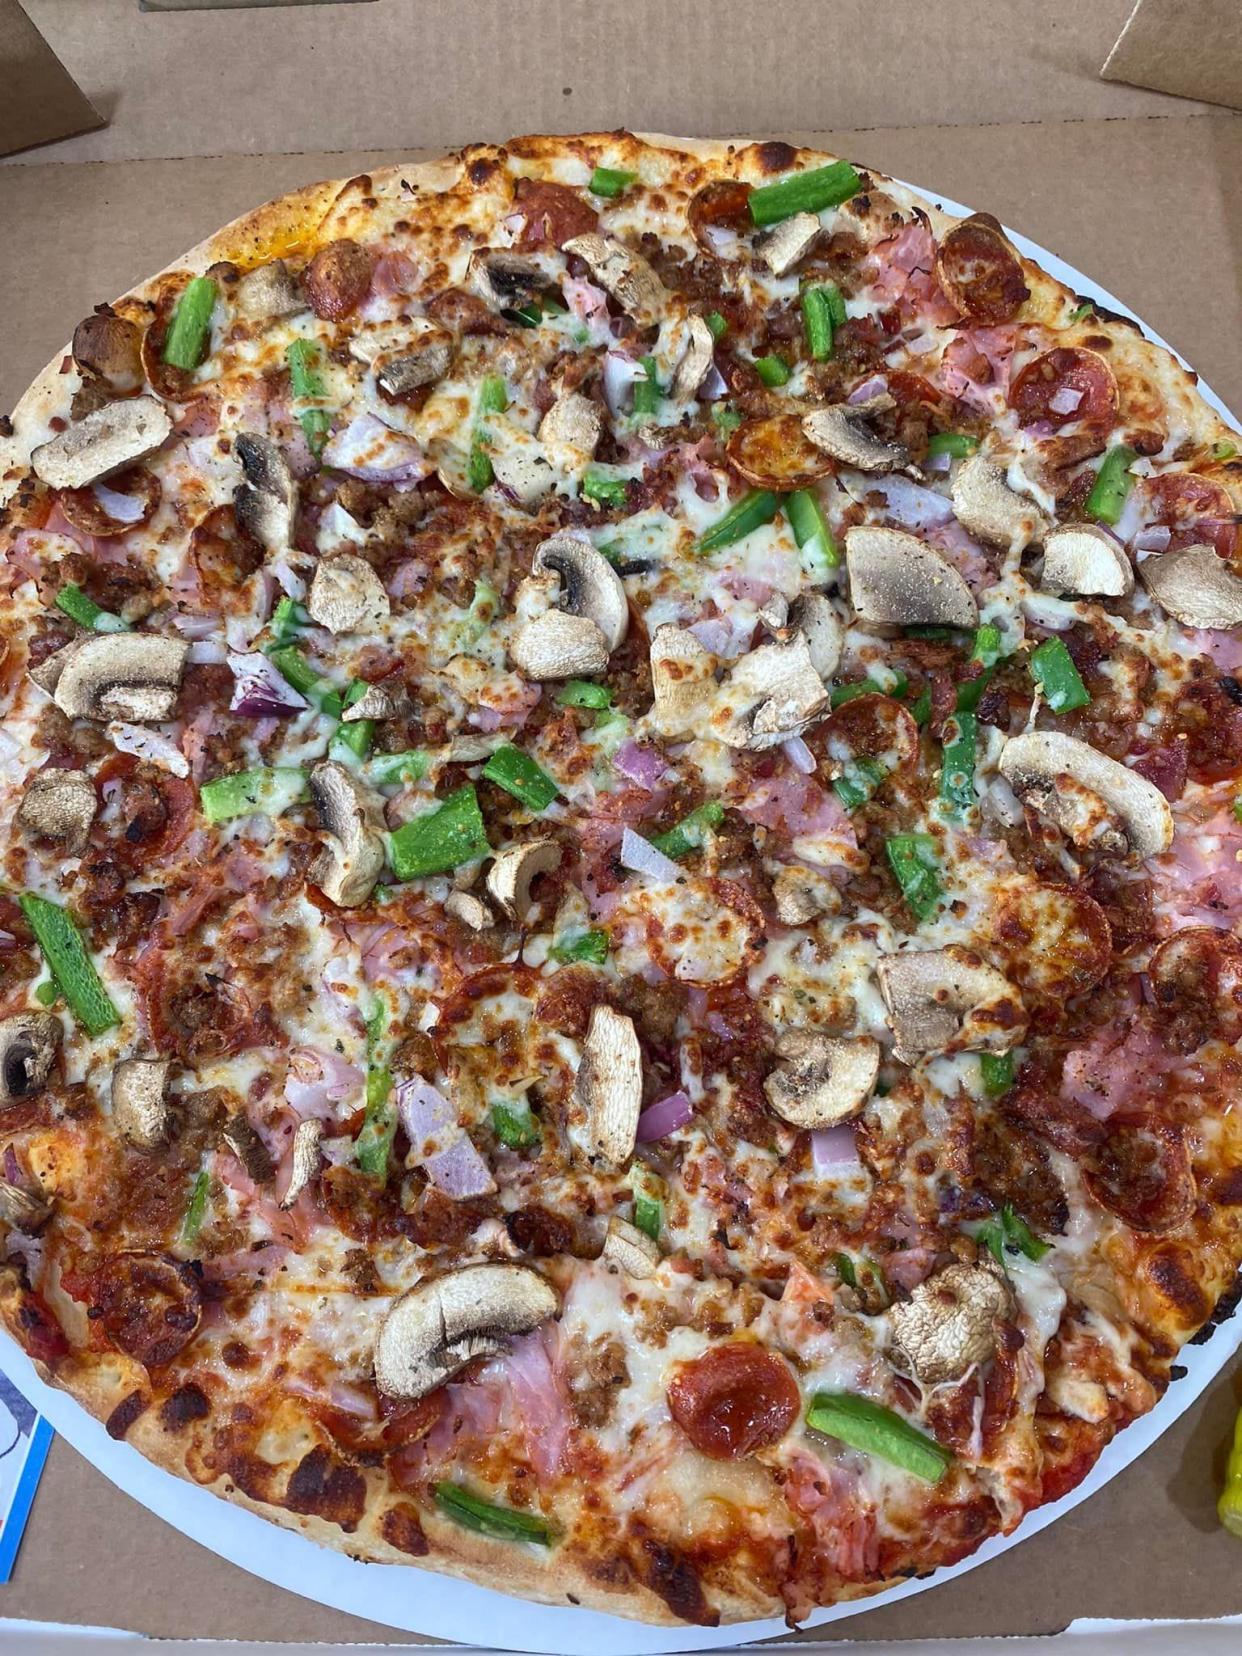 The Graham Slam pizza at Casey's Dugout is loaded with sausage, pepperoni, beef, ham, bacon, onions, green peppers, black olives, mushrooms, and pepperoncini. The crust is thicker than the typical Evansville Una-style crust and the pizza is cut into triangles.